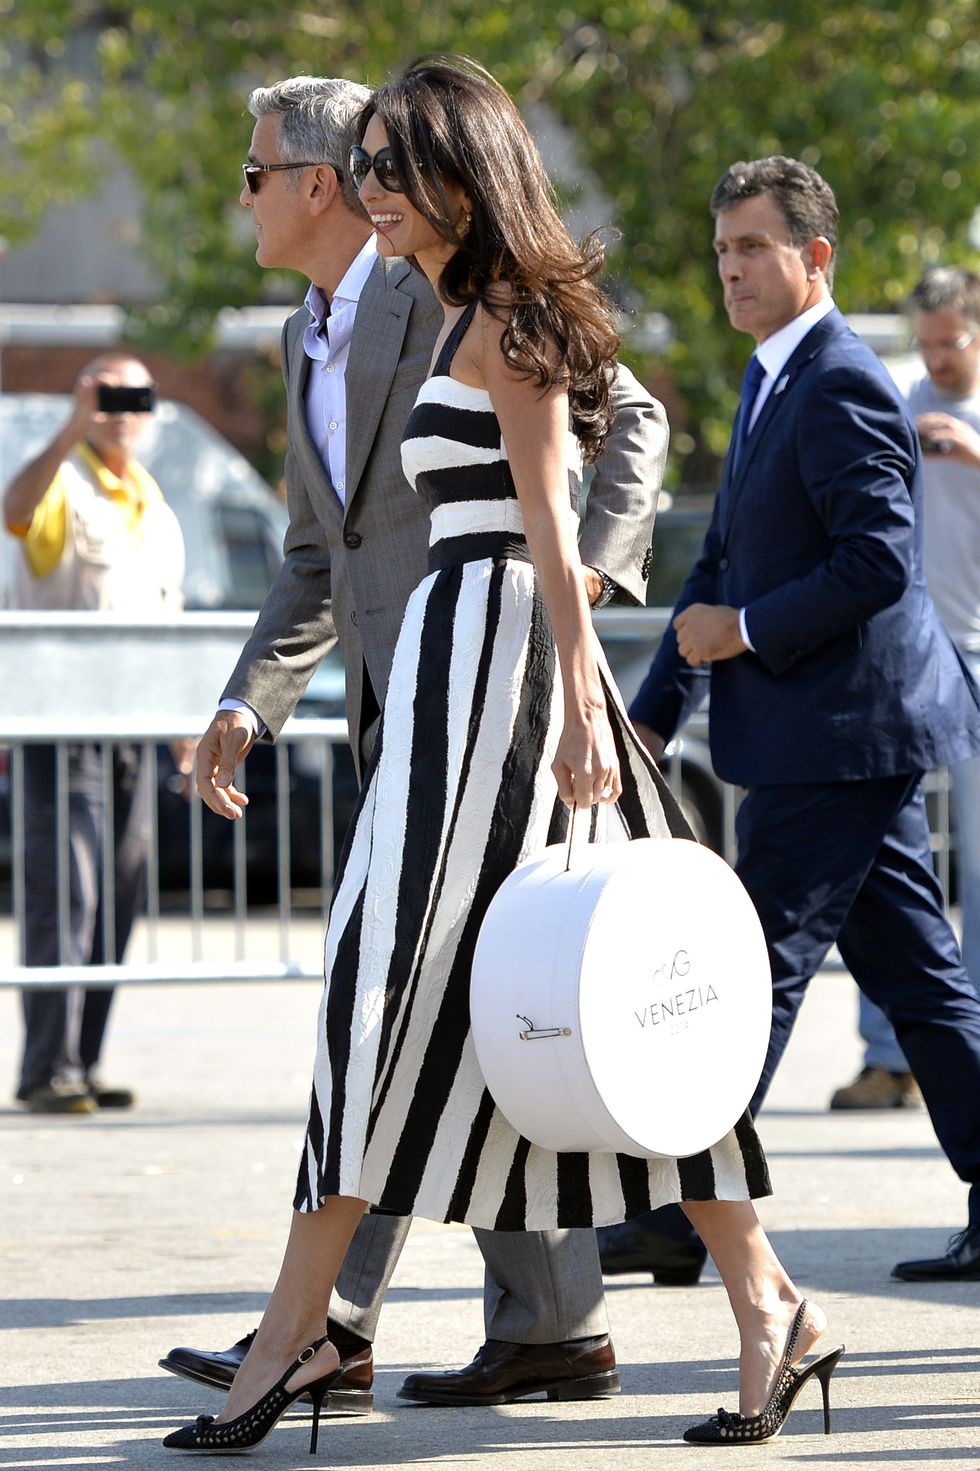 George Clooney (L) and his Lebanon-born British fiancee, Amal Alamuddin (C) holding a bag bearing the logo A&G (Amal and George ) arrive at Venice's Piazzale Roma in Venice on September 26, 2014, on the eve of their wedding. The party of the year is happening here: the fresco-adorned Aman hotel on Venice's Grand Canal is feverishly preparing for George Clooney's wedding to Amal Alamuddin, his Lebanon-born British fiancee. Hollywood stars and the world's paparazzi have already begun arriving for the nuptials of the world's most sought-after catch, who will, sources said, celebrate with 136 guests at the exclusive seven-star hotel in the 450-year-old Palazzo Papadopoli. AFP PHOTO / ANDREAS SOLARO        (Photo credit should read ANDREAS SOLARO/AFP/Getty Images)